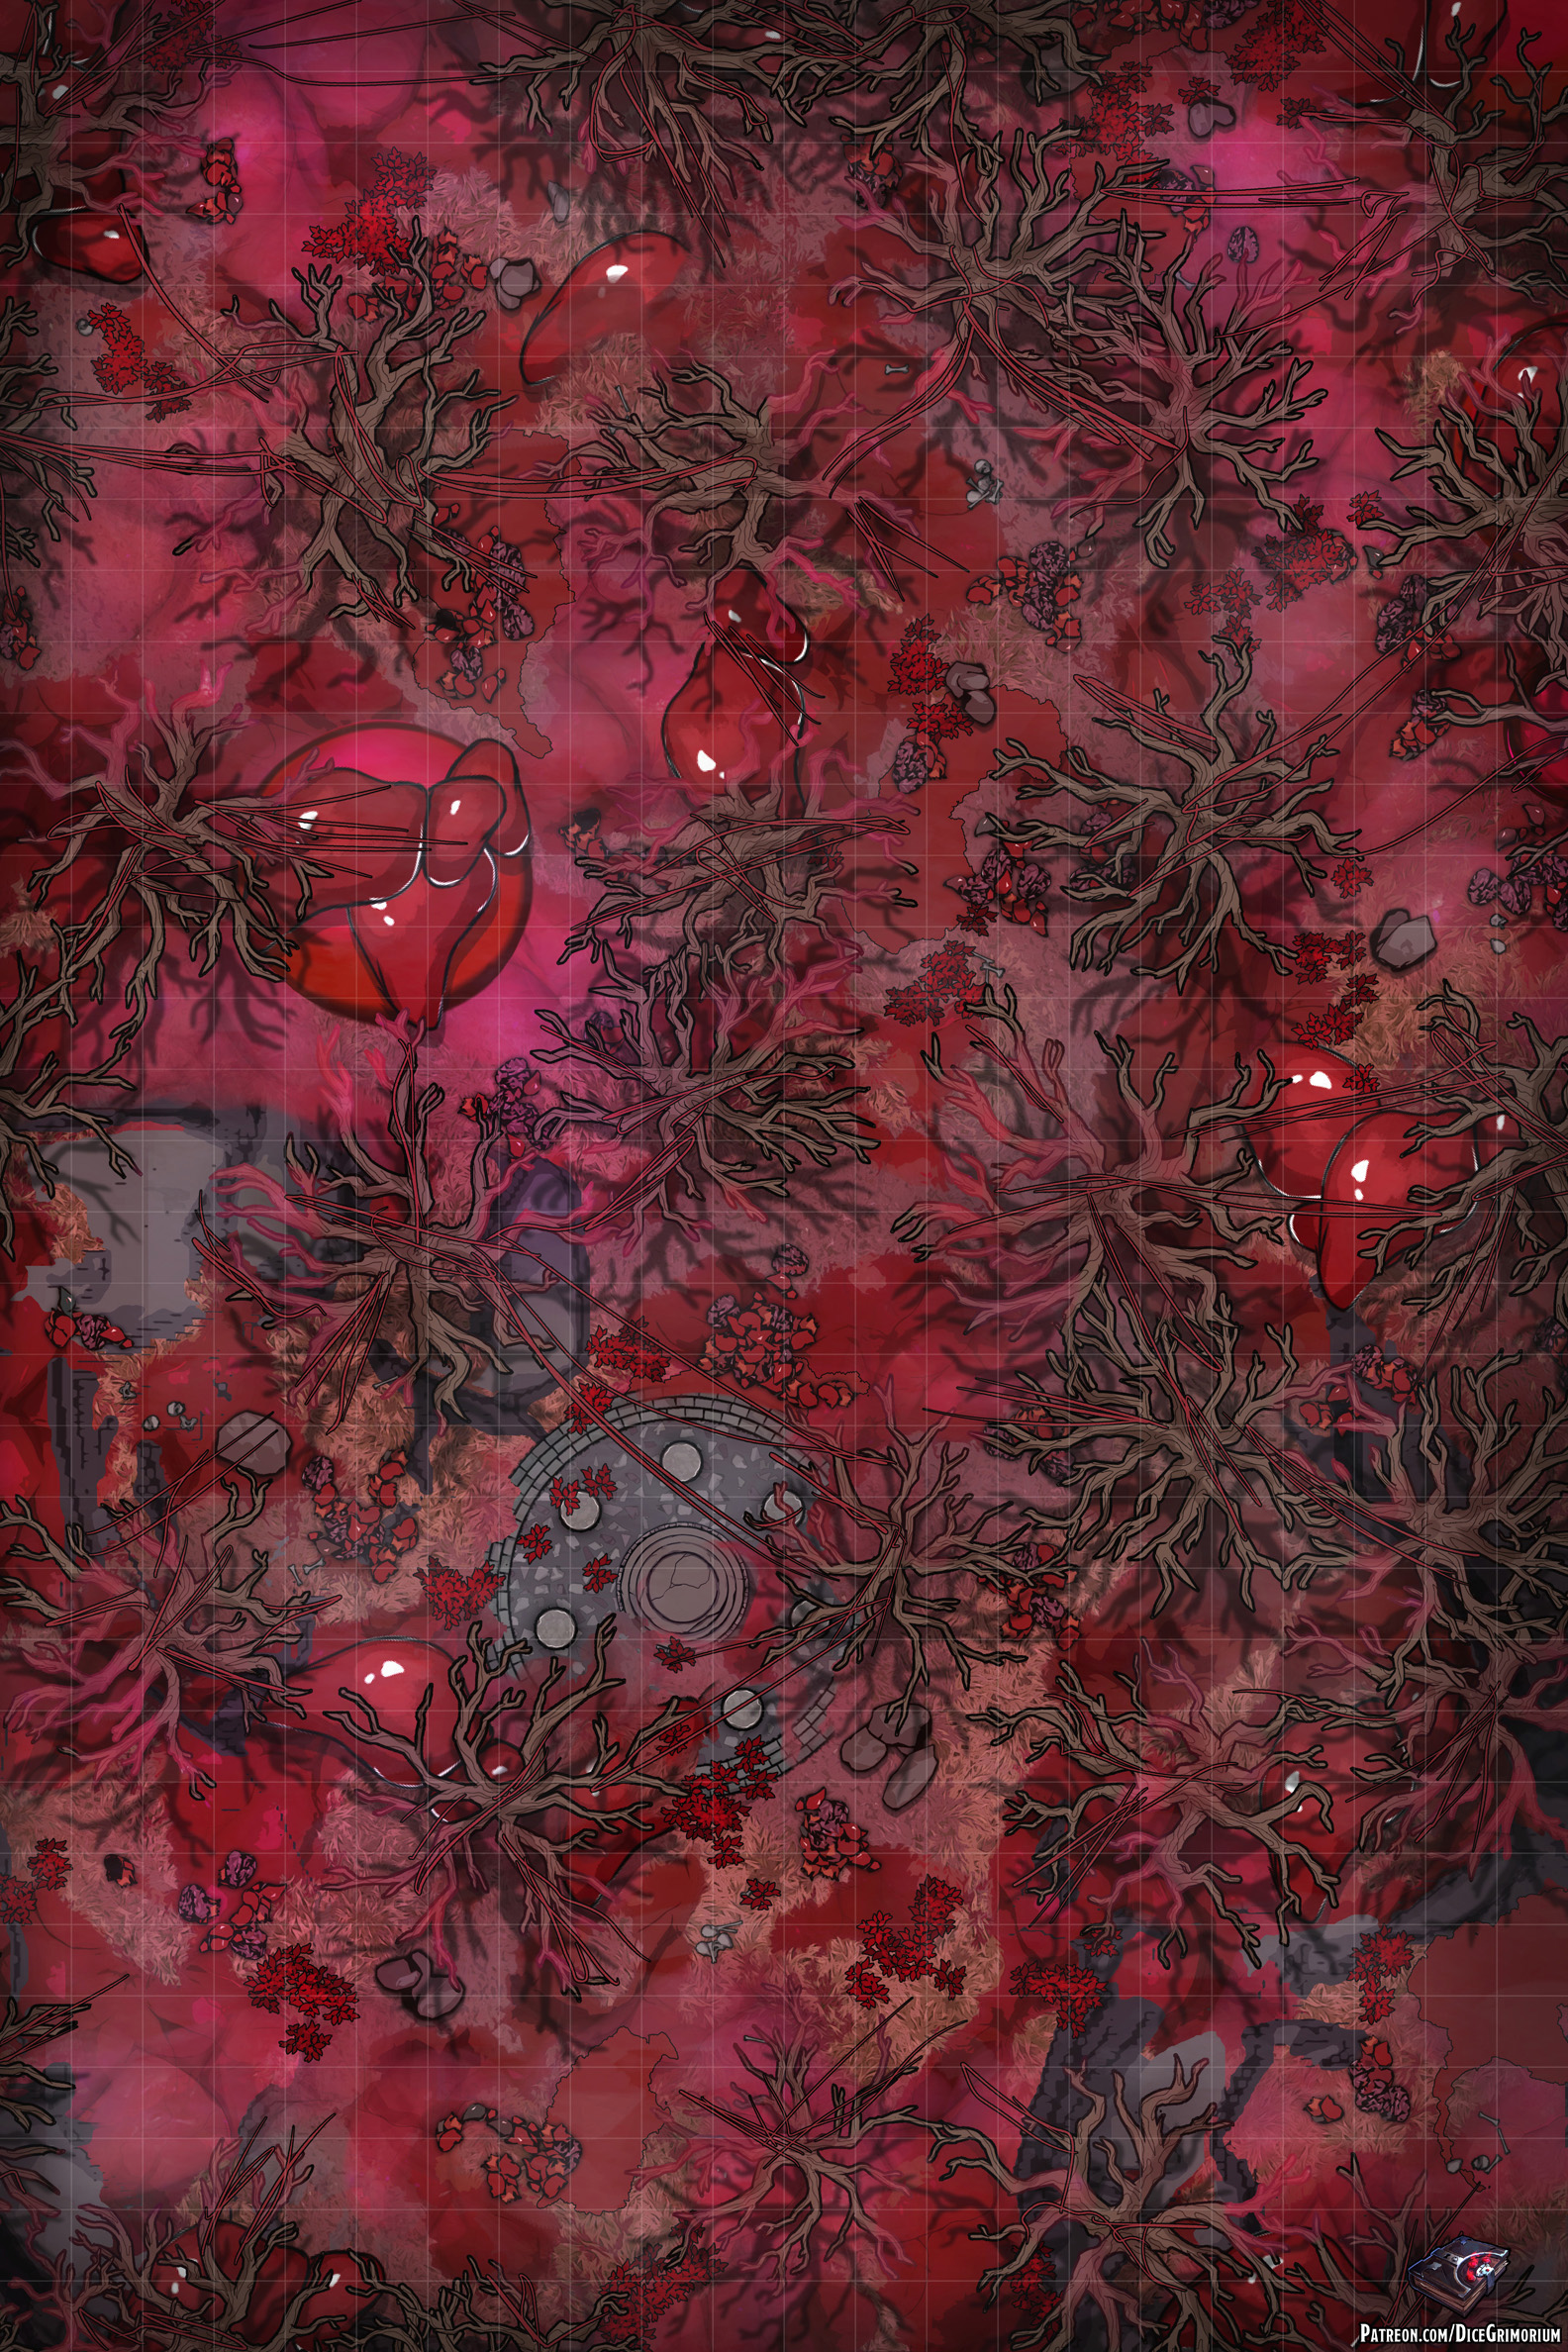 Corrupted-Forest-Gridded-22x33-MapPublic.jpg